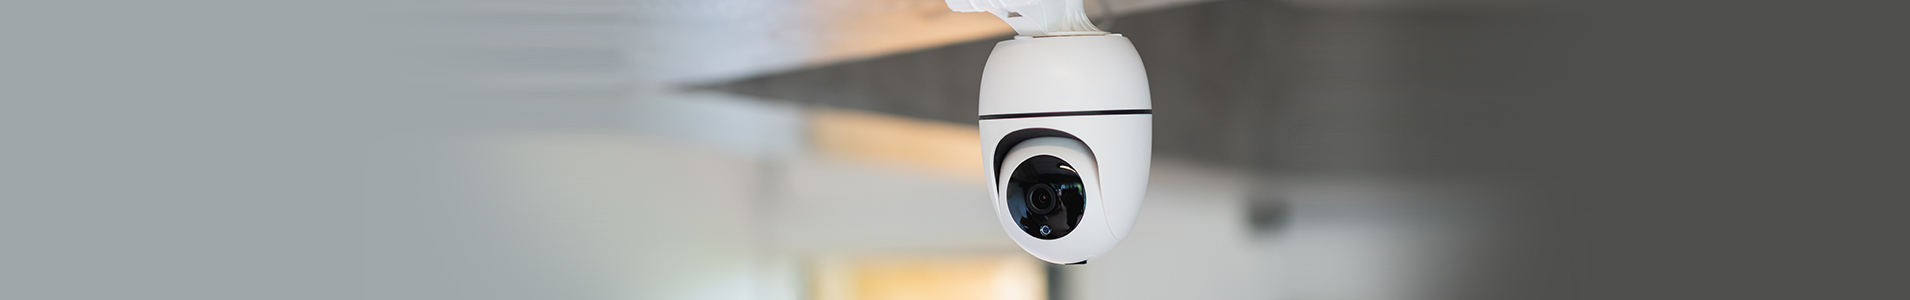 Choosing the Right CCTV for Your Home Between Digital vs. Analogue CCTV?